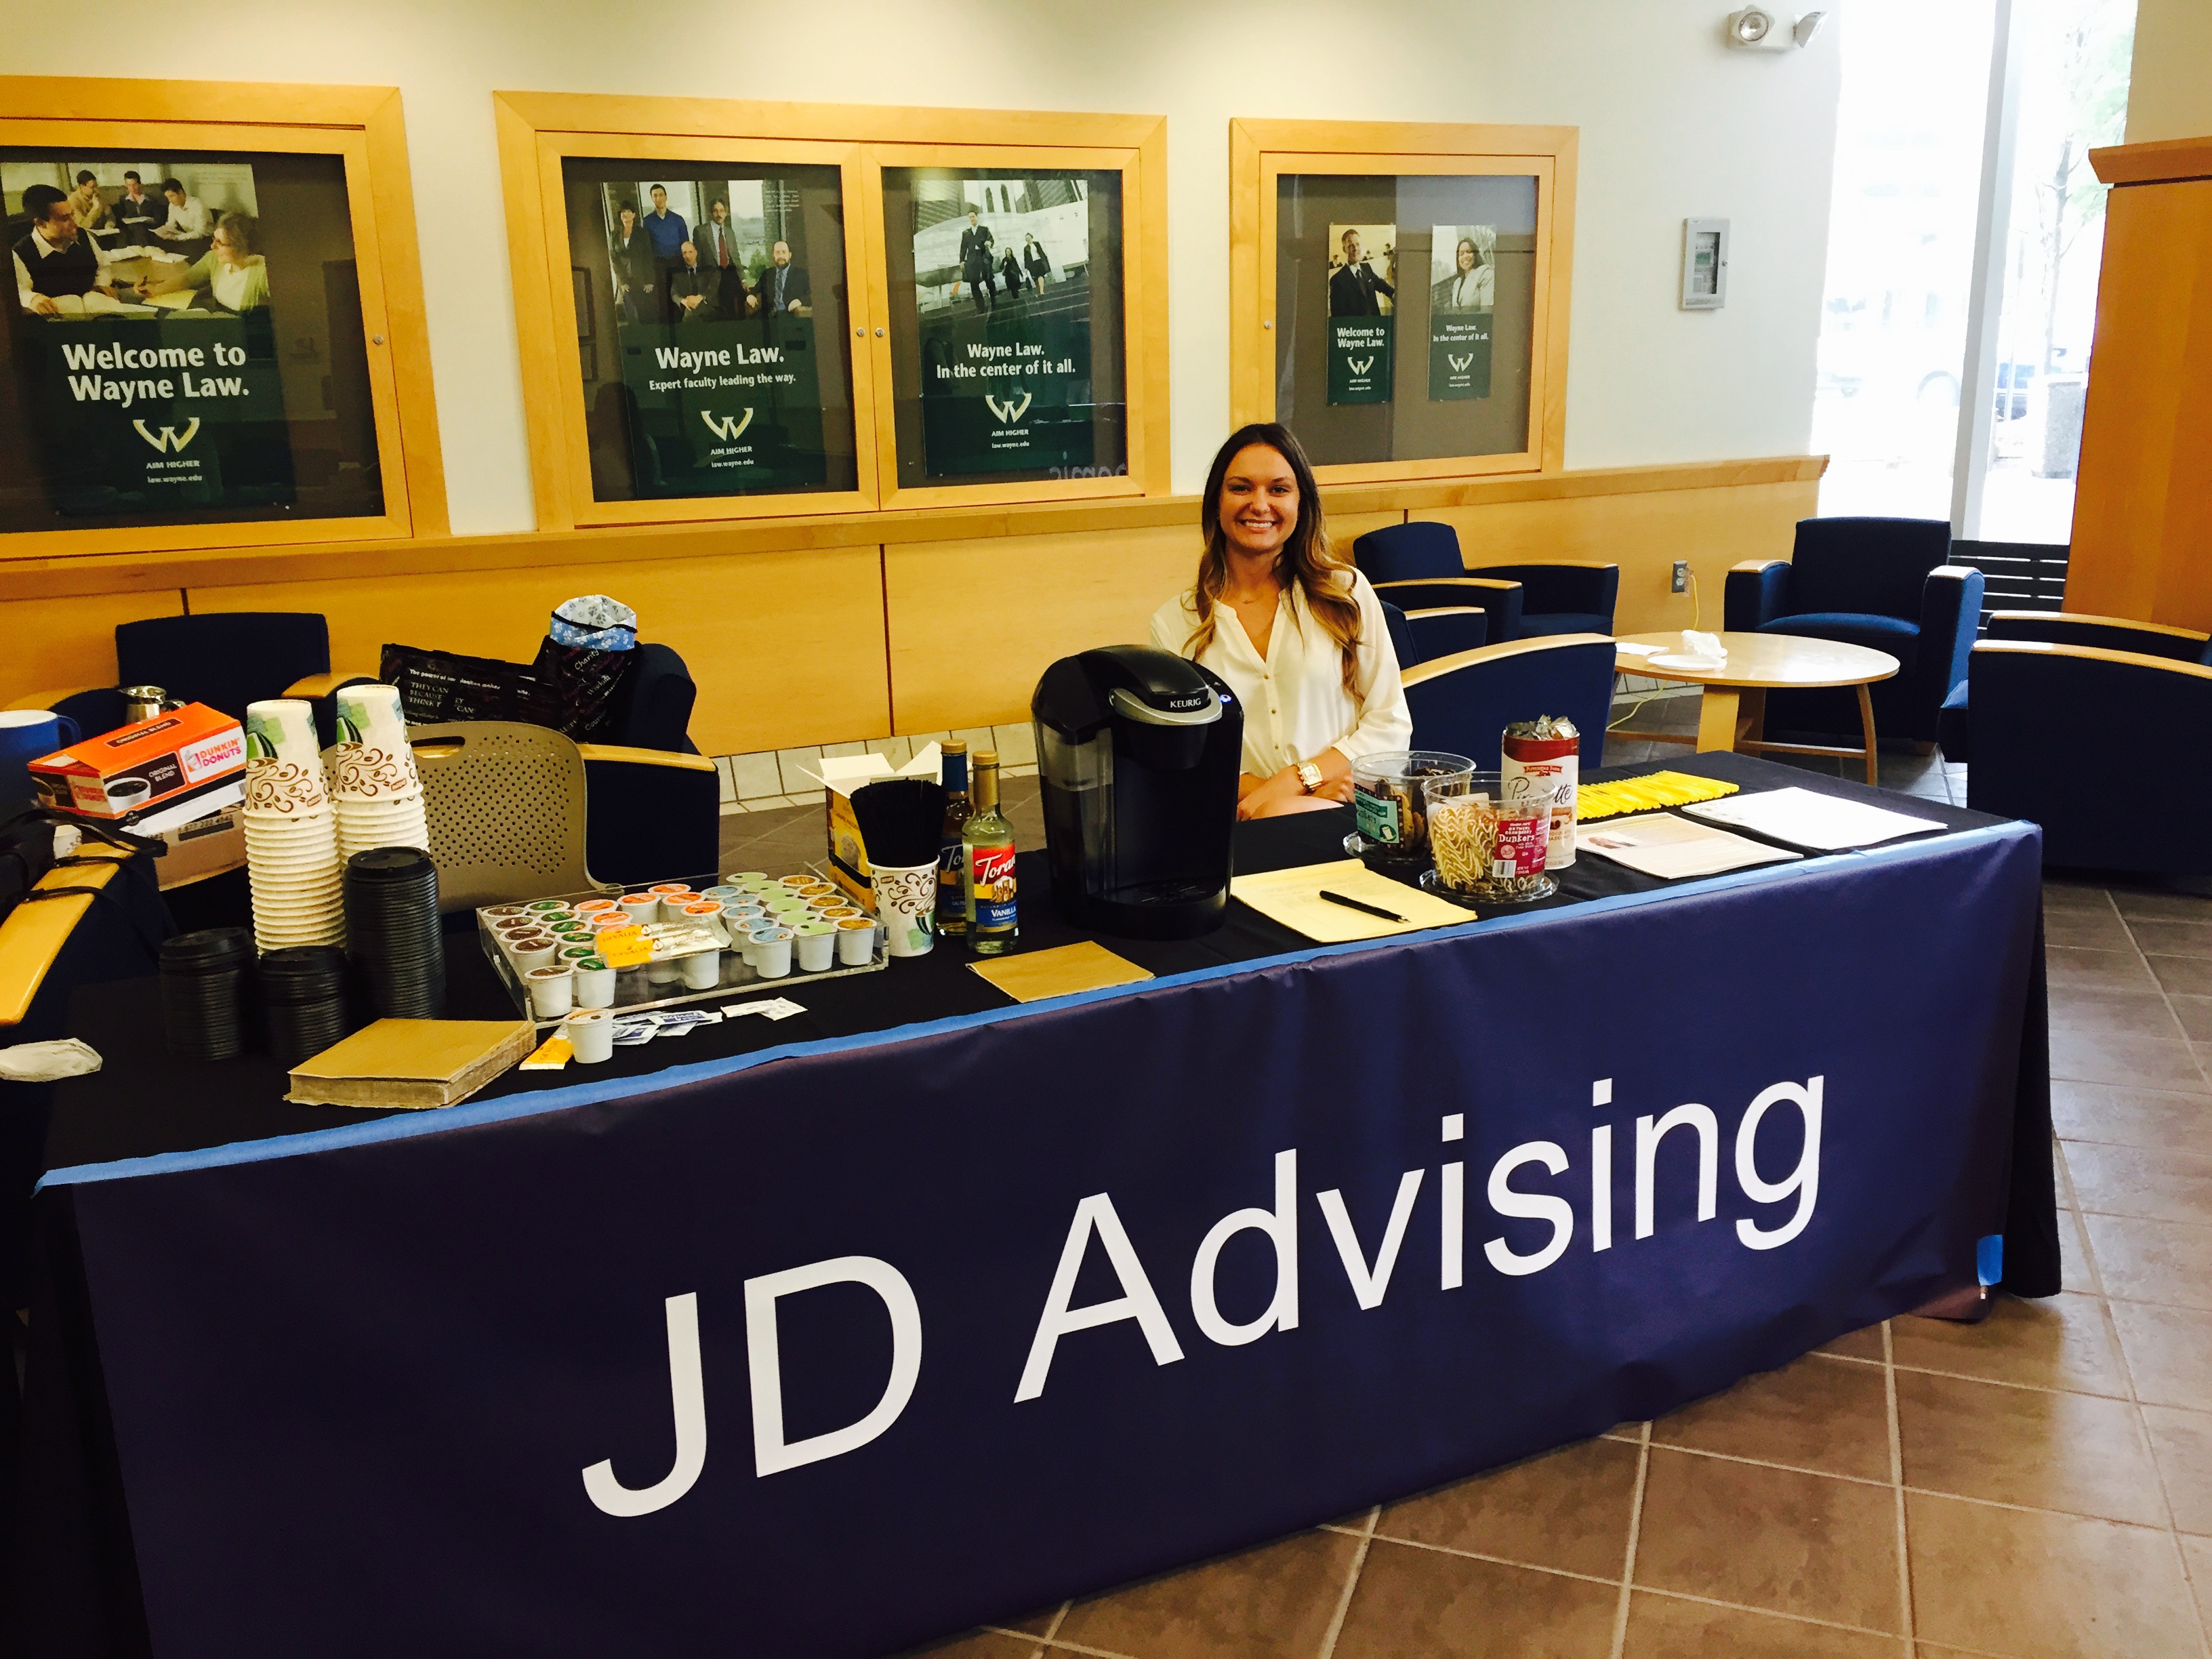 Jd Advising S Giveaway For Wayne State University Law School Students